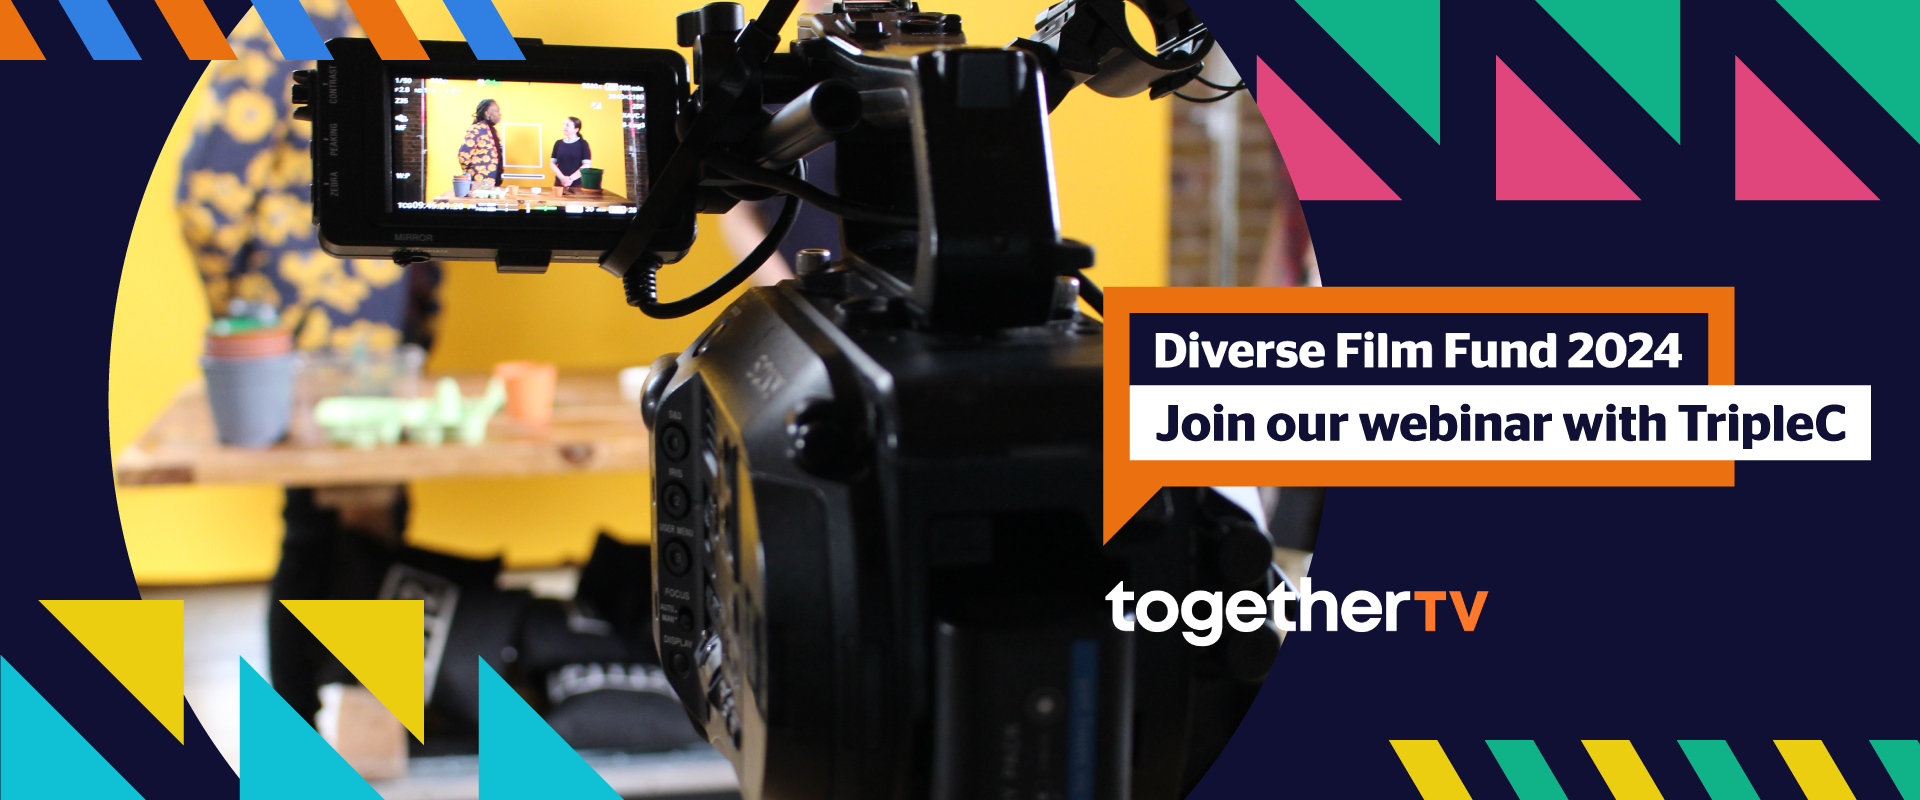 Orange speech bubble with "Diverse Film Fund 2024: Join our webinar with TripleC" written in it is layered on top of a graphic with colourful triangles and a photo of a video camera shooting two people against a yellow backdrop.